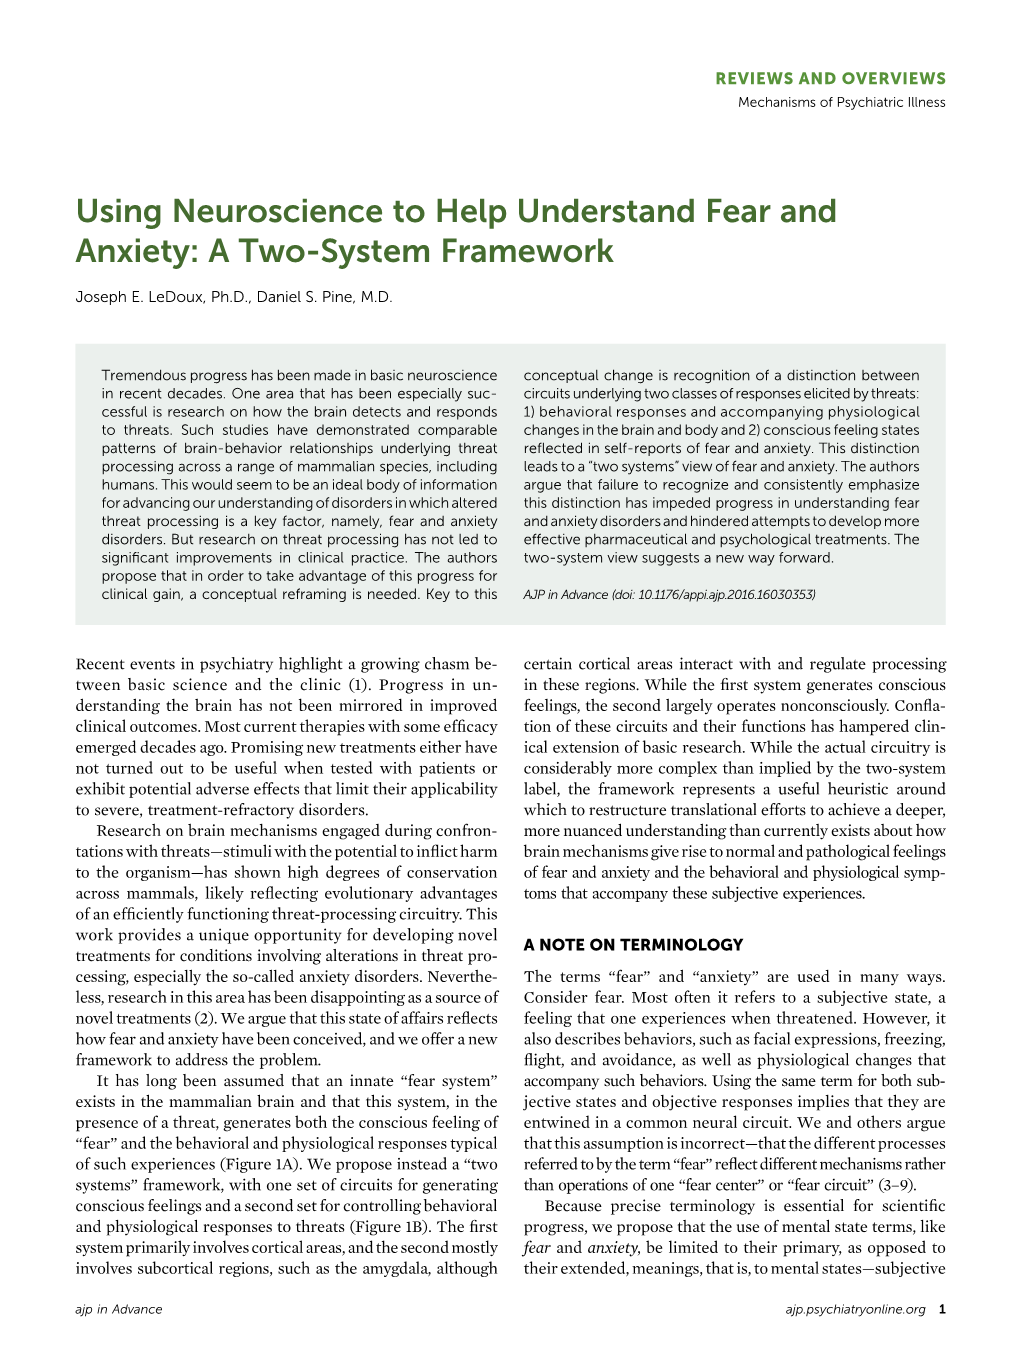 Using Neuroscience to Help Understand Fear and Anxiety: a Two-System Framework